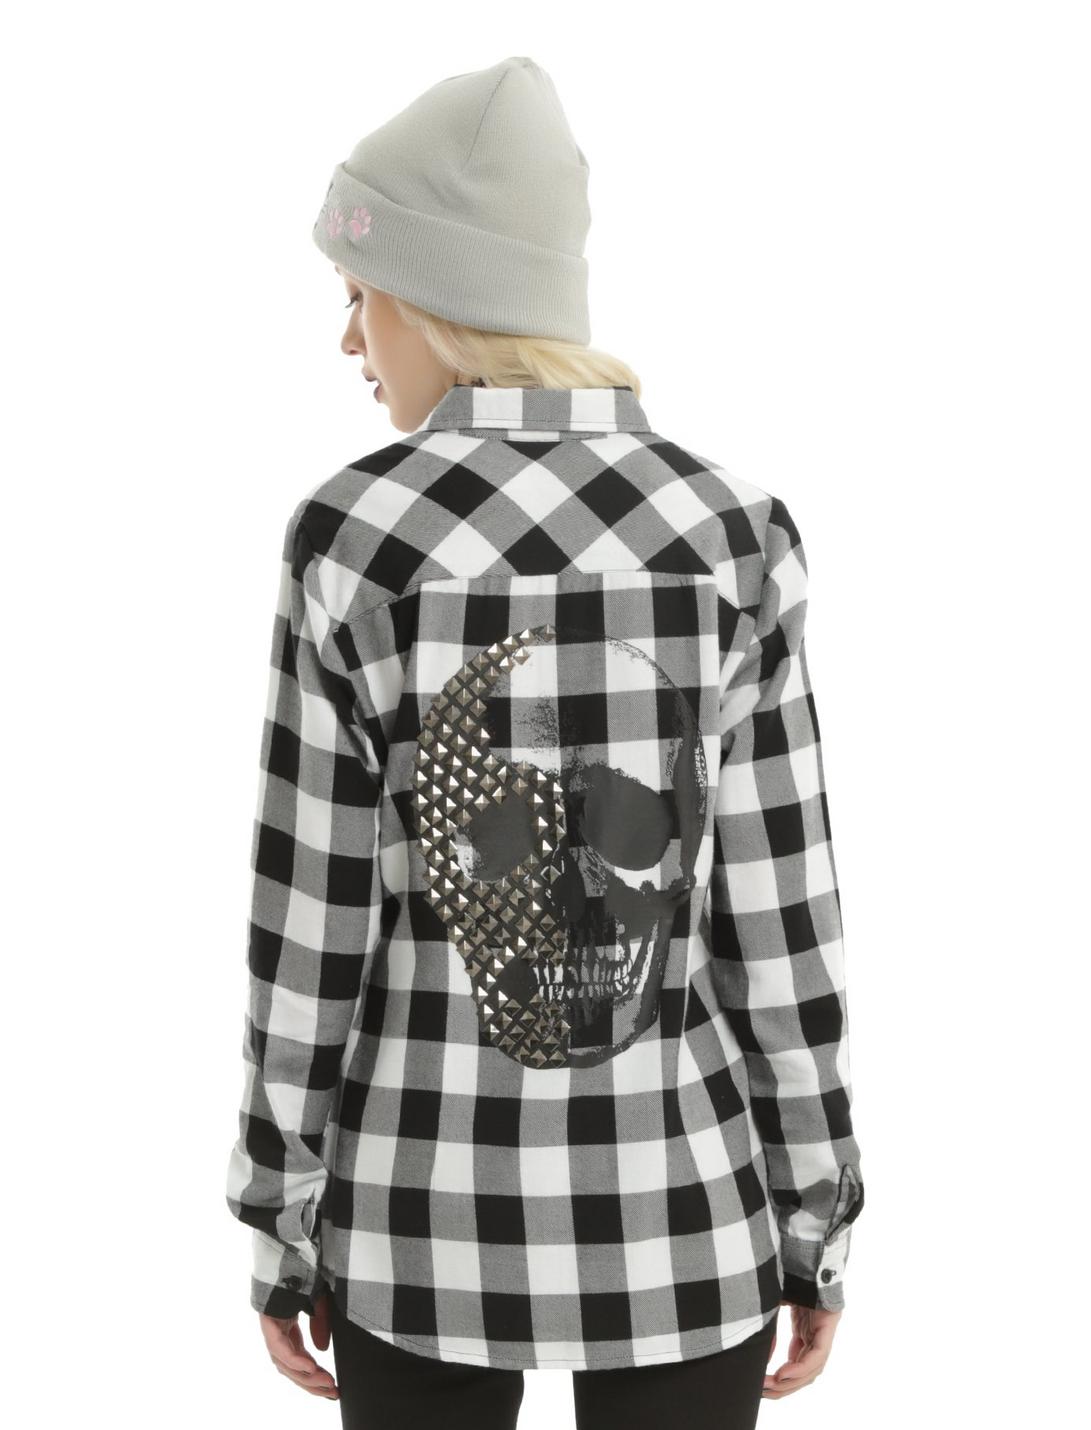 Black & White Plaid Studded Skull Girls Woven Button-Up | Hot Topic